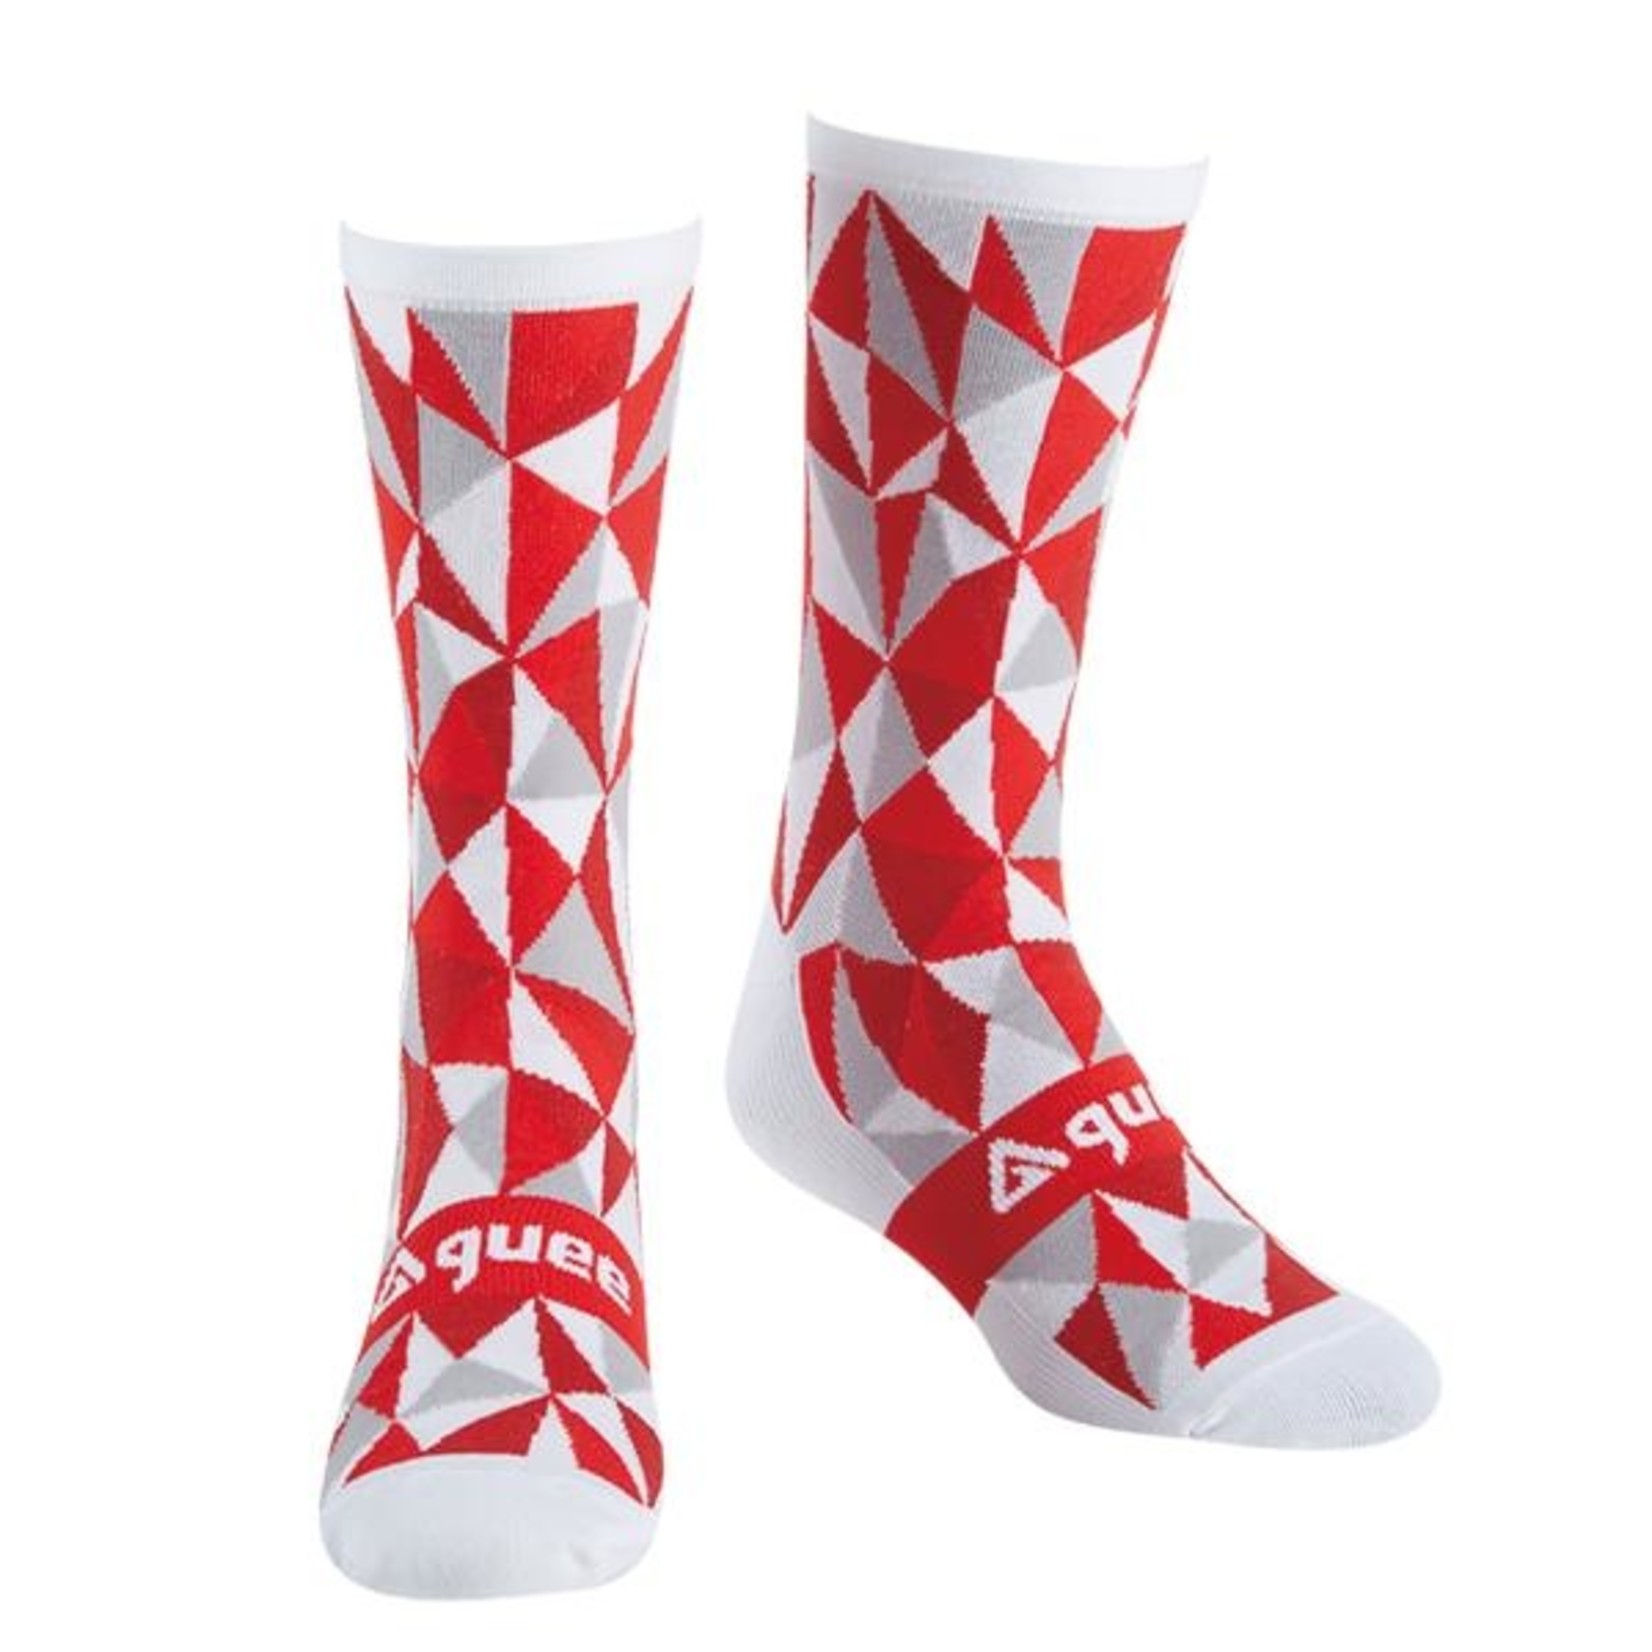 Guee Guee Socks - Geo Racefit -Colour White & Red - Size Medium-Large